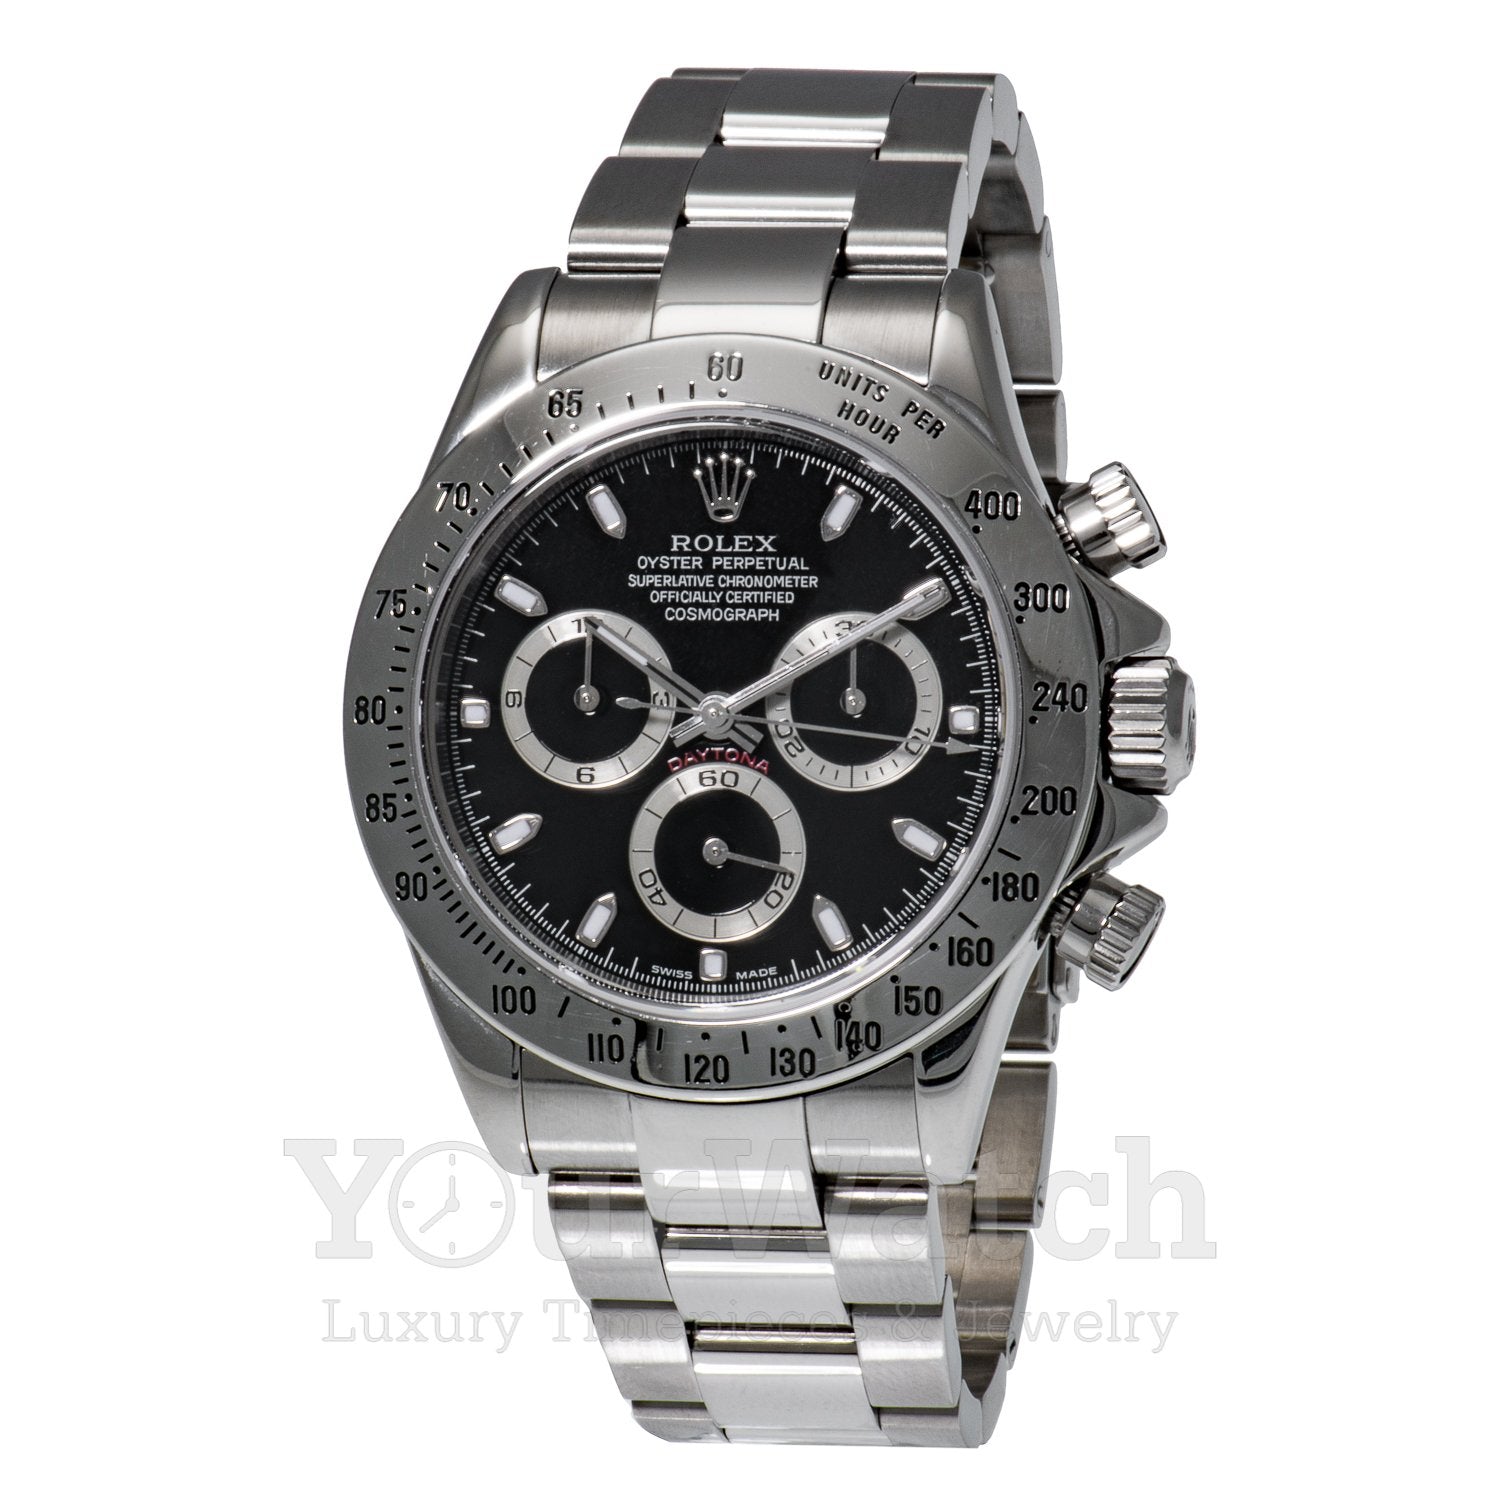 Rolex 116520 Cosmograph Daytona Stainless Steel Black Dial 40mm Mens Watch